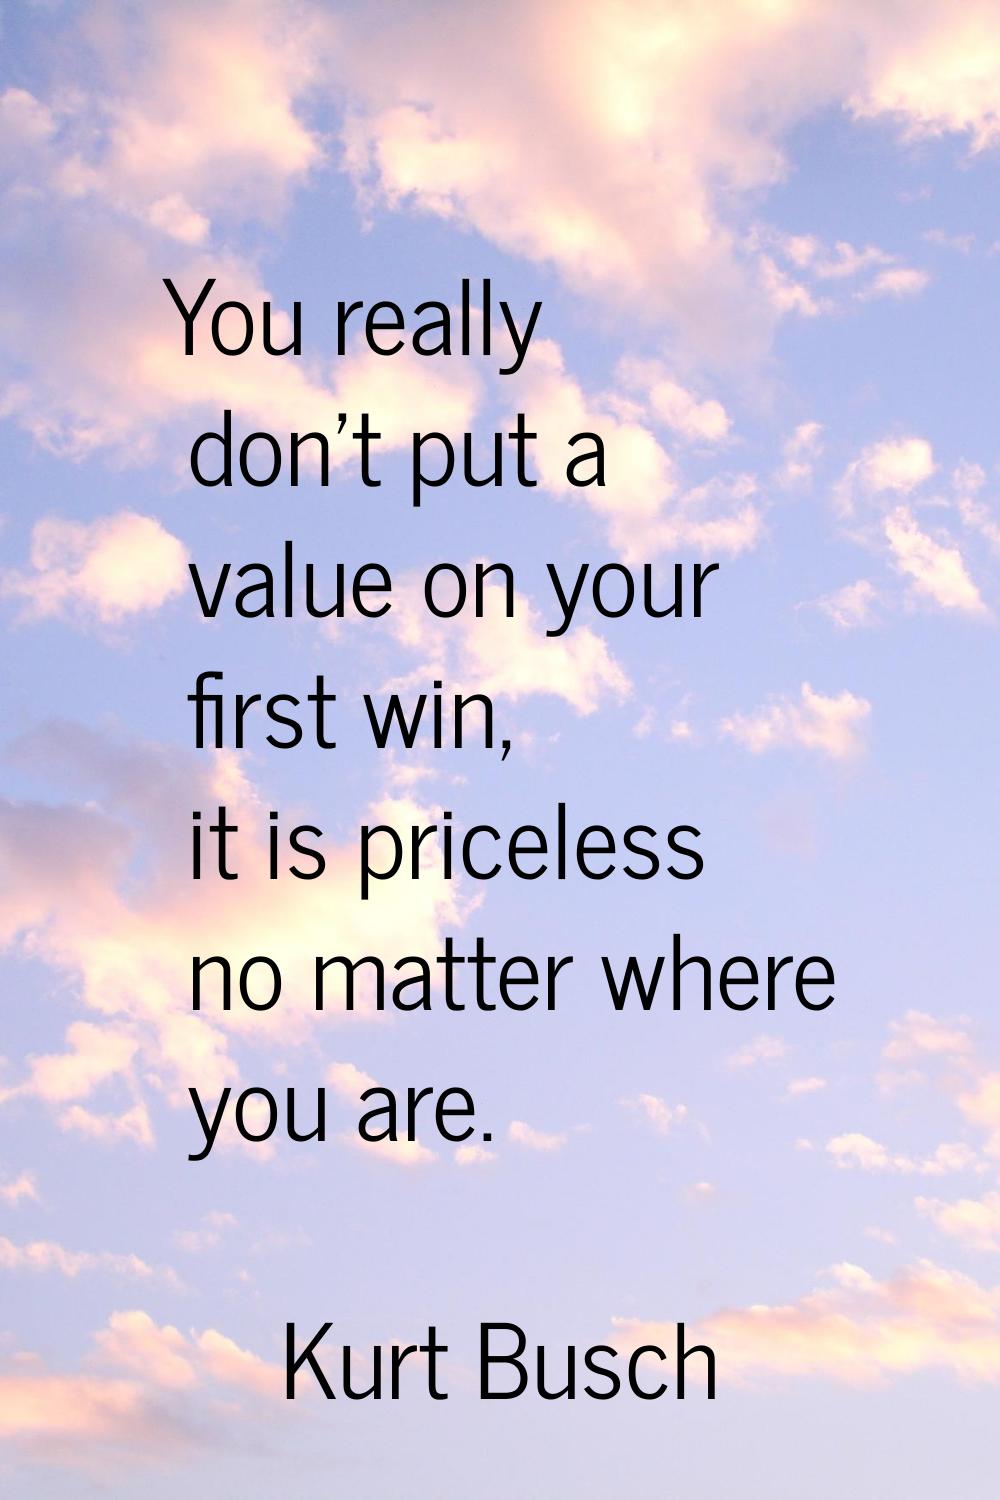 You really don't put a value on your first win, it is priceless no matter where you are.